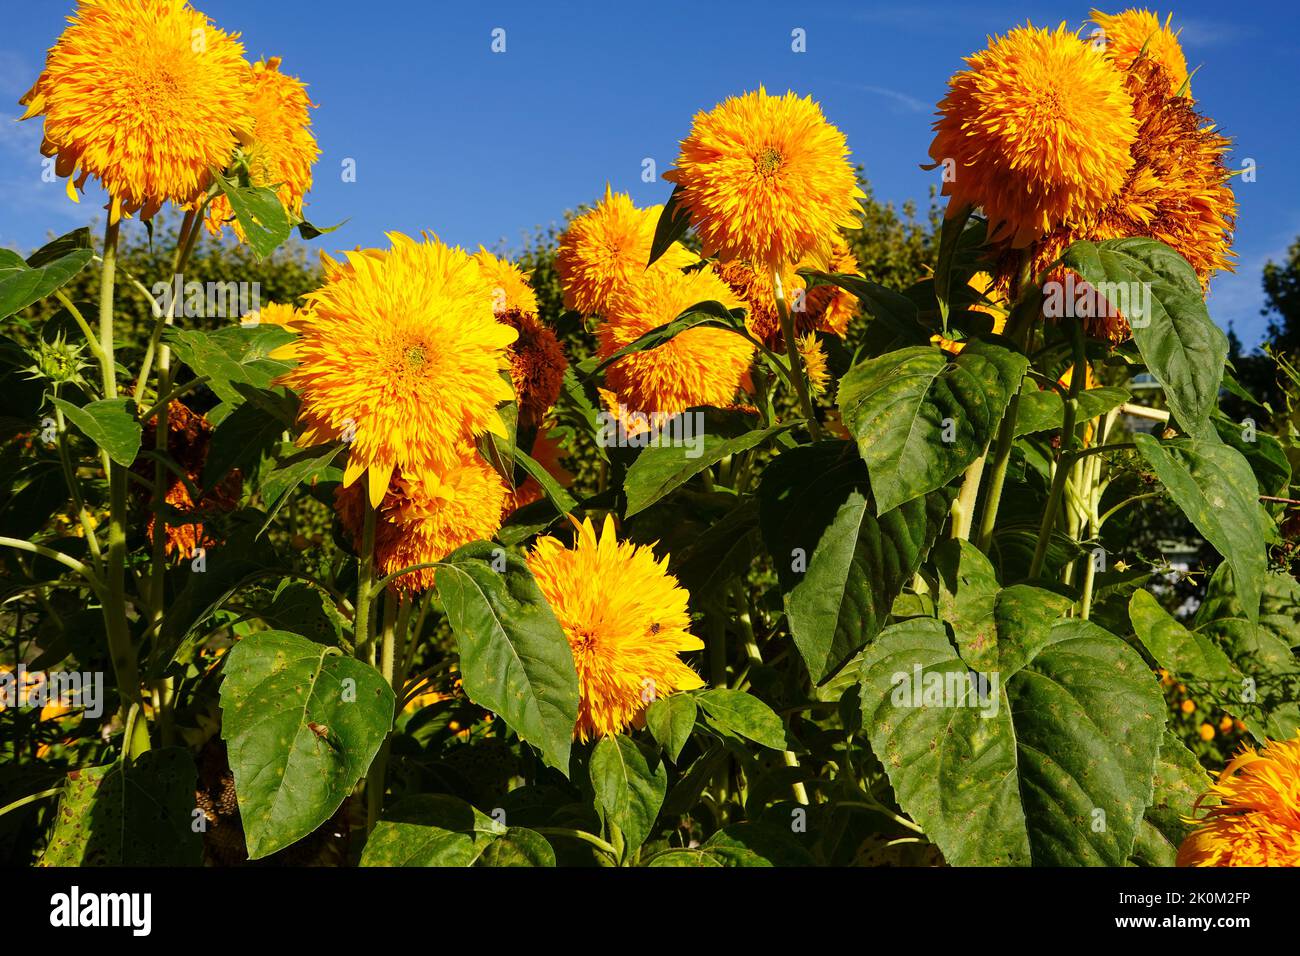 Double sunking sunflower, Helianthus annuus, blossoms against a deep blue sky. Stock Photo